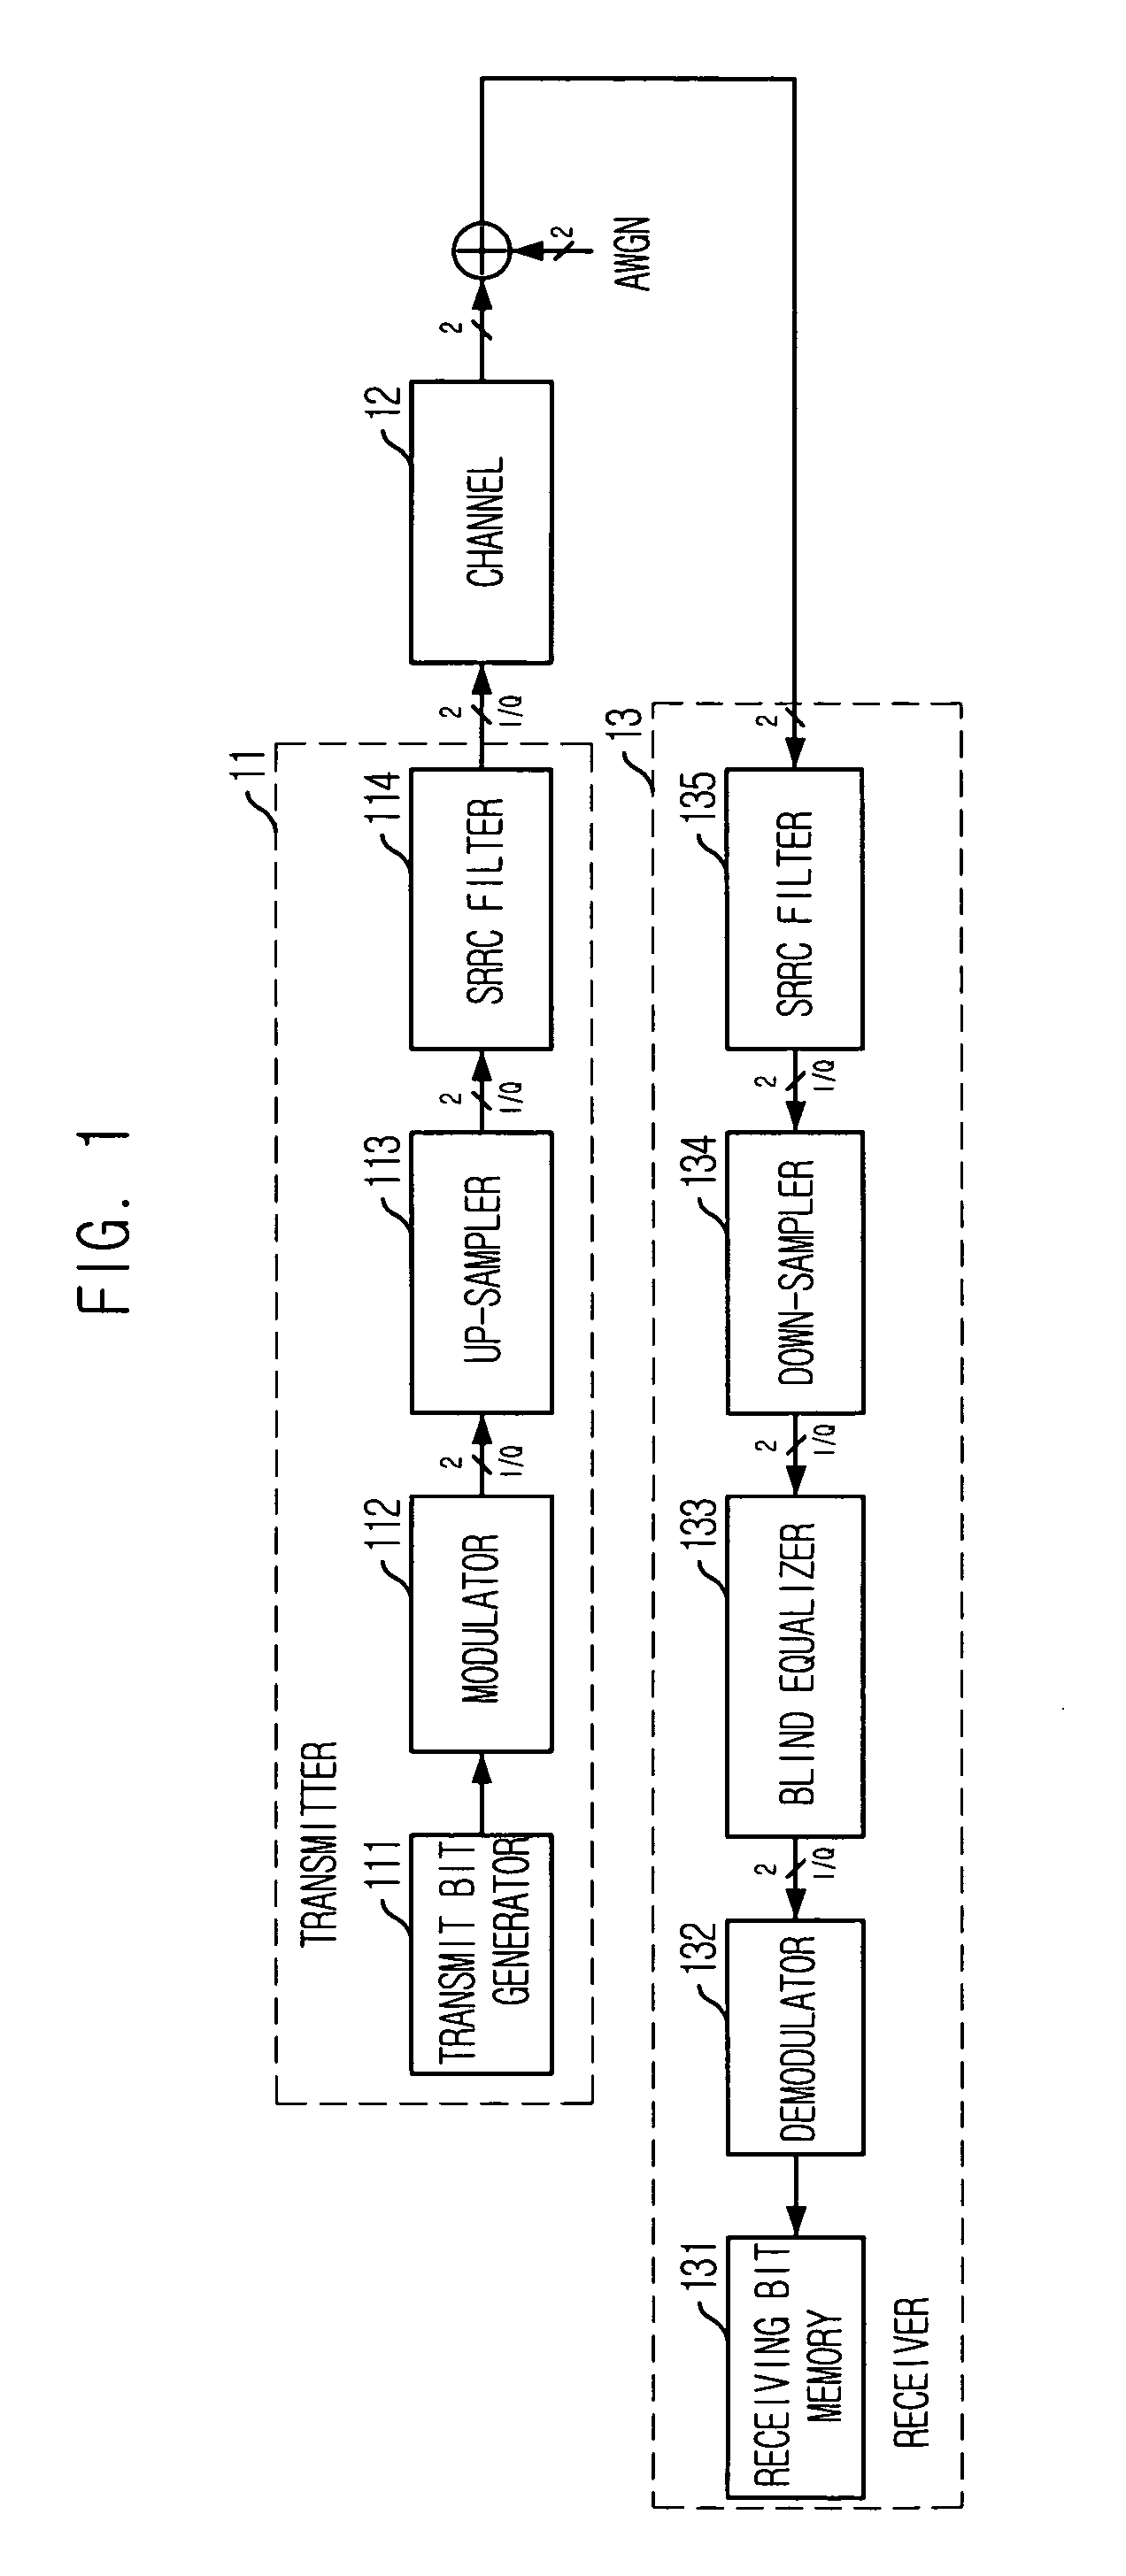 Apparatus and method for stable DEF using selective FBF